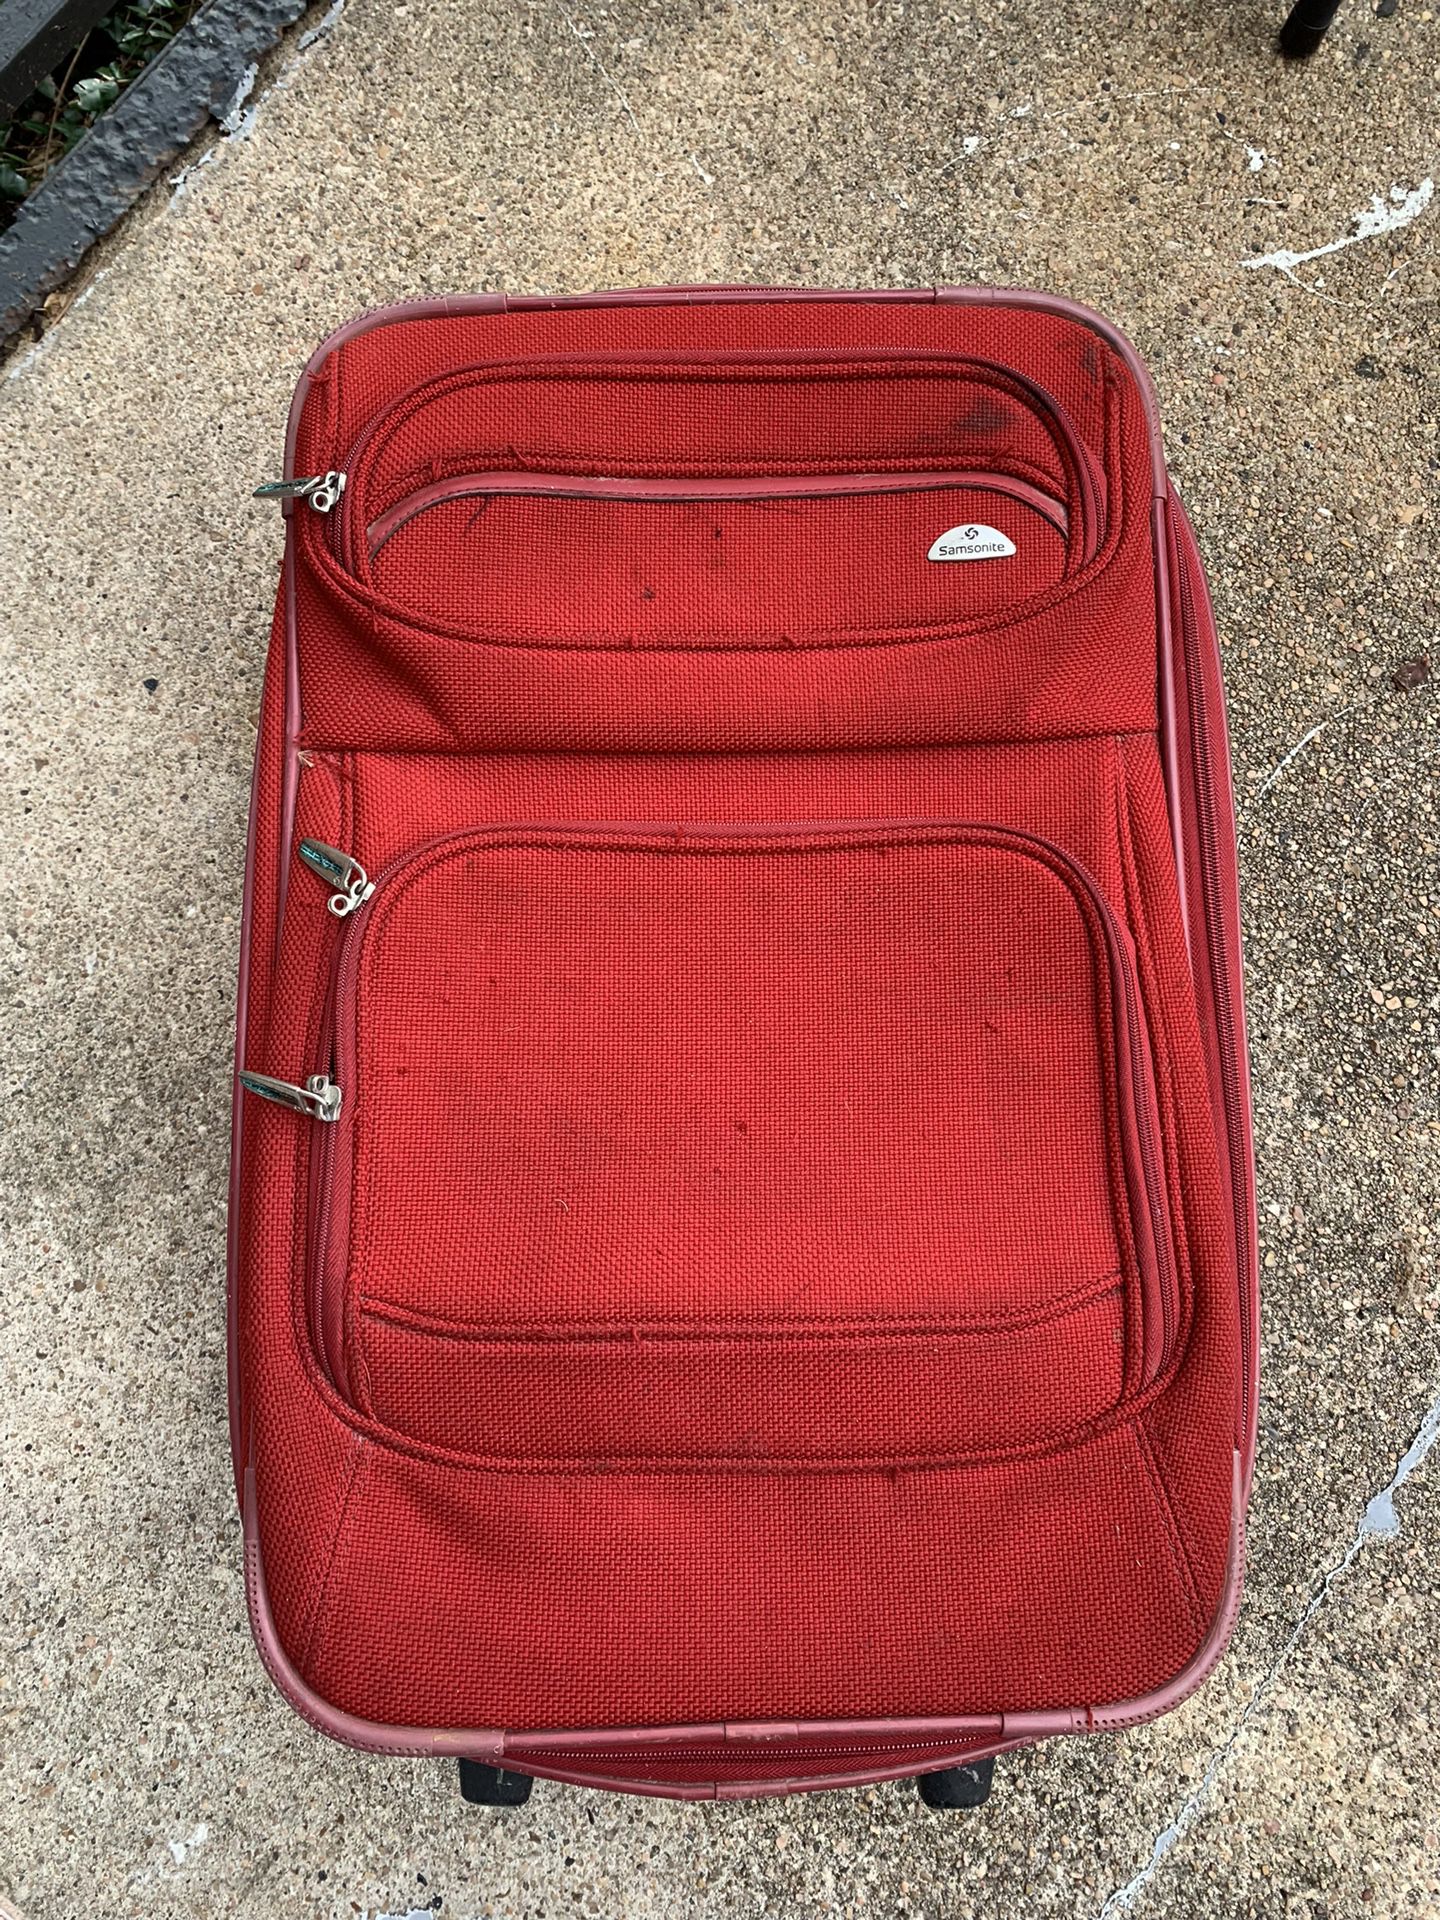 Red Travel Bag 18x14  Inches